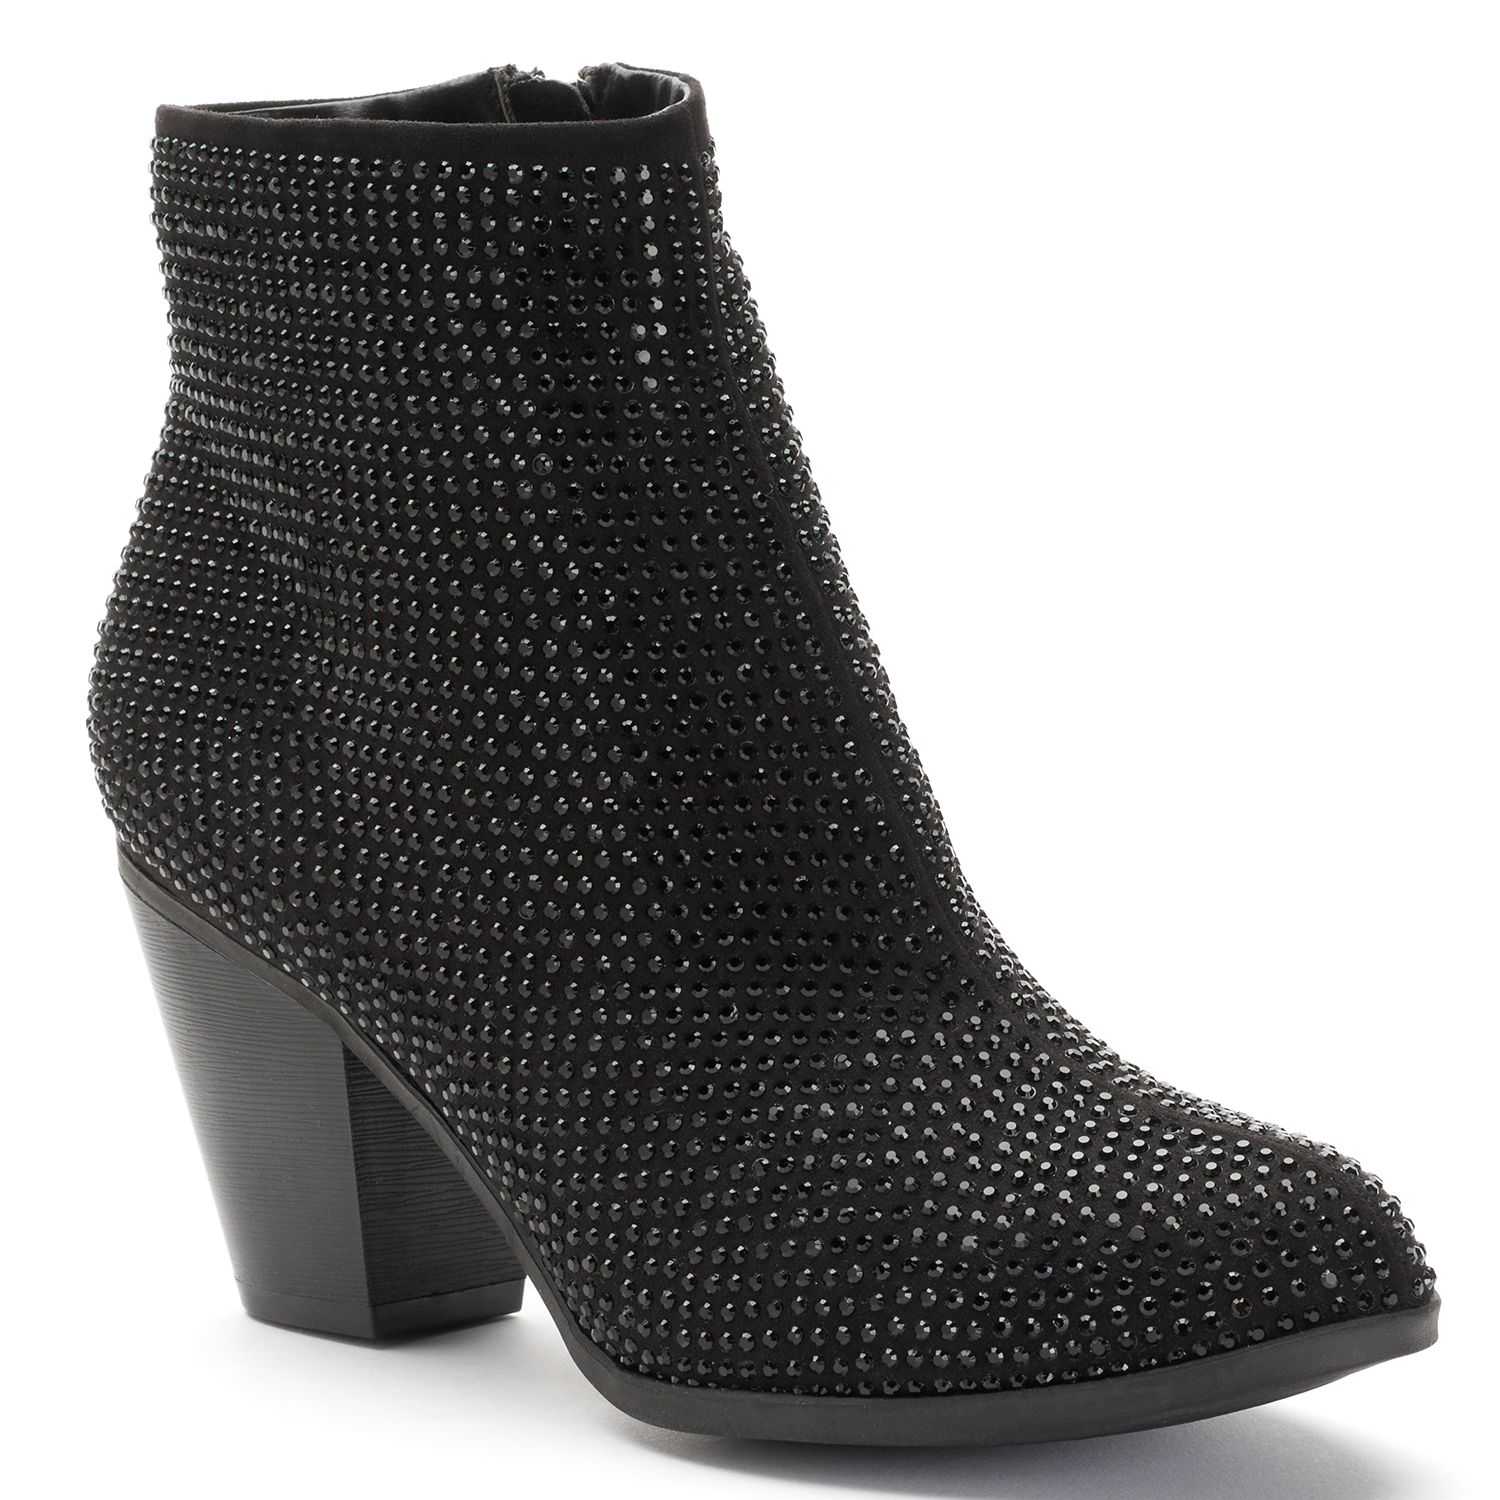 juicy couture winter boots